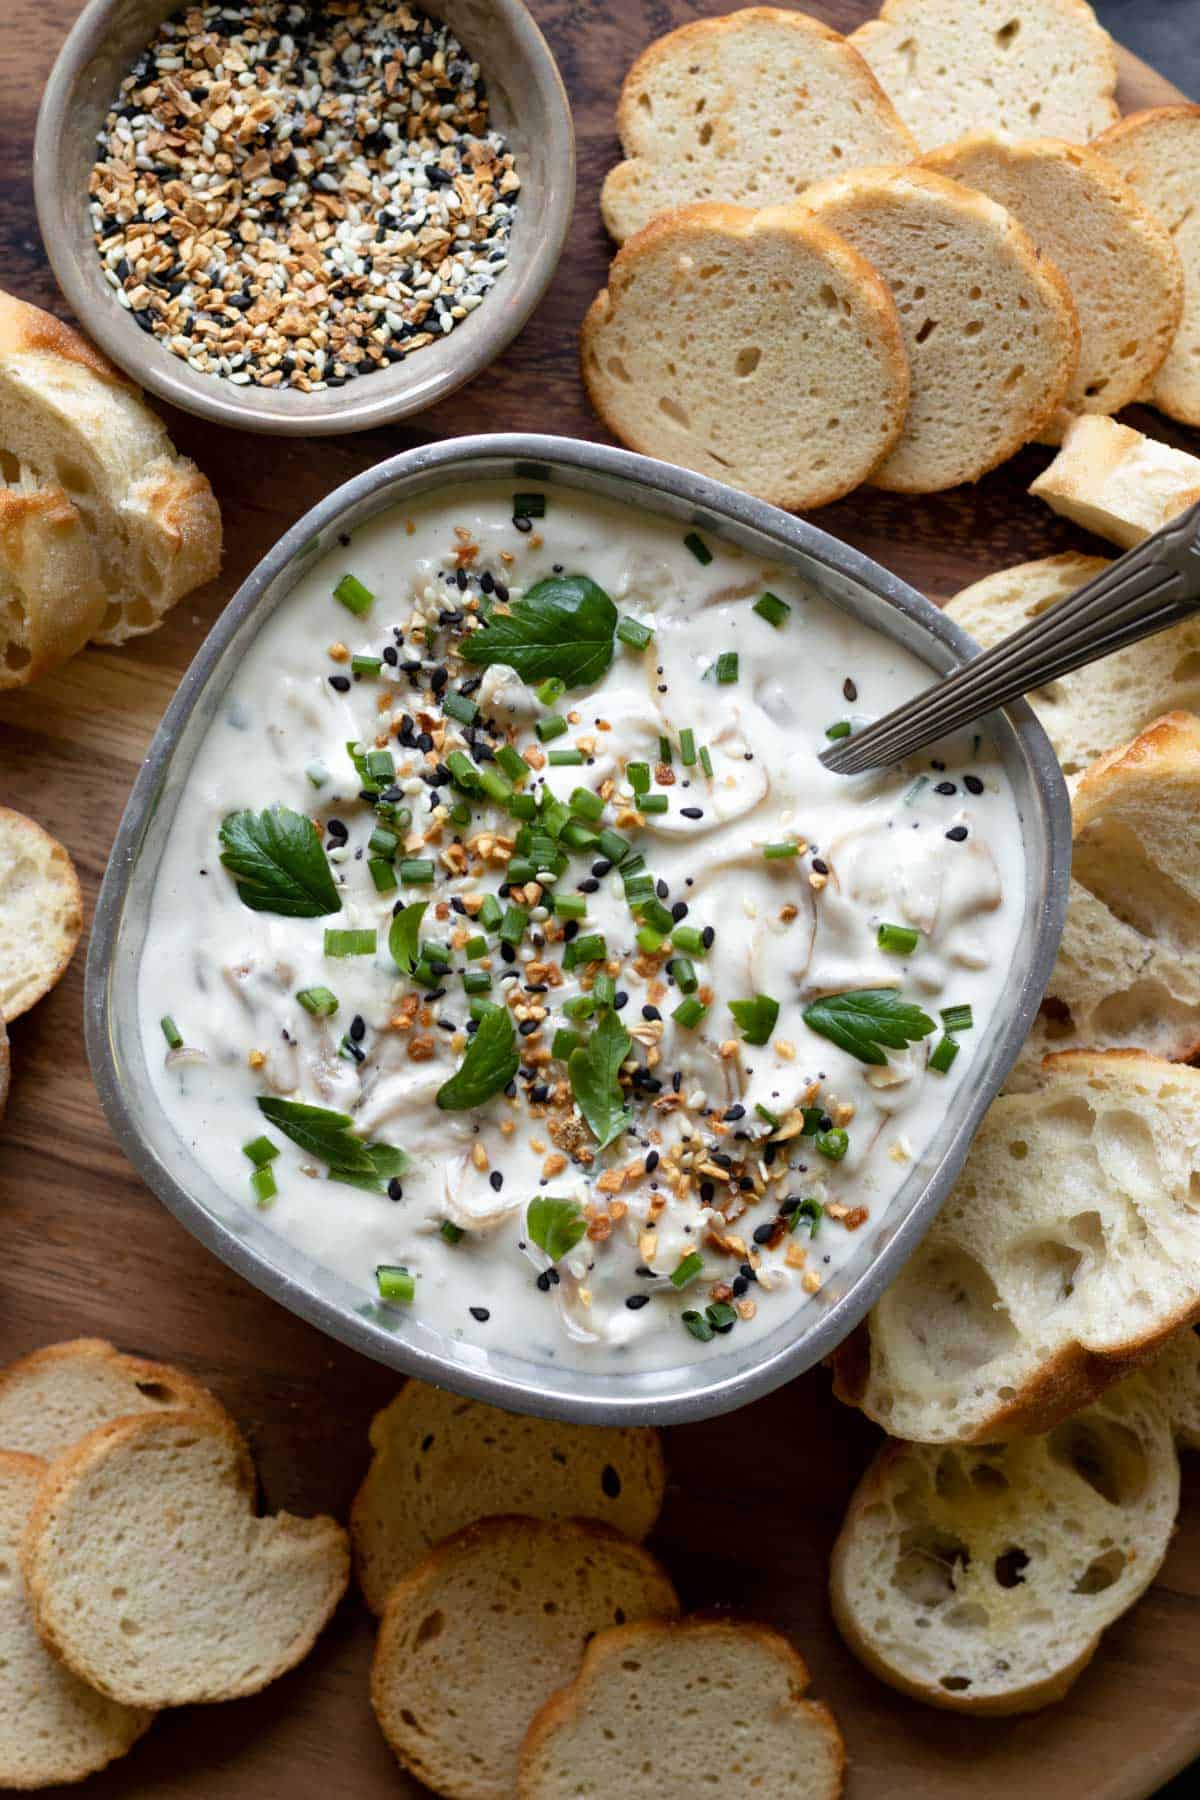 caramelized vegan onion dip in a serving bowl topped with parsley and surrounded by bread.